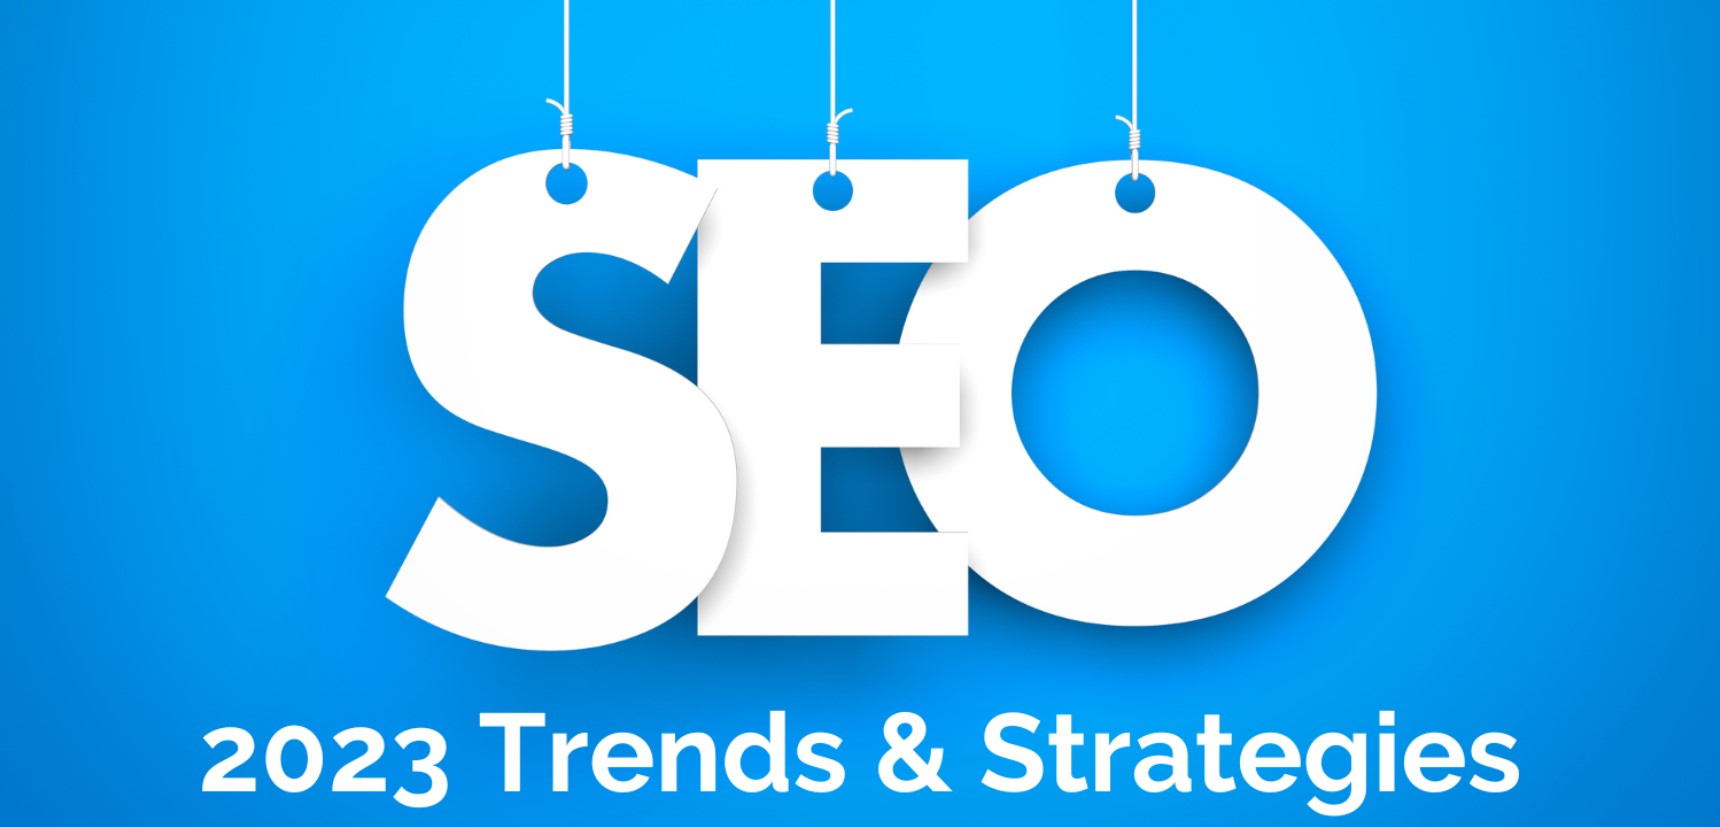 4 SEO Trends That Are Dominating 2023